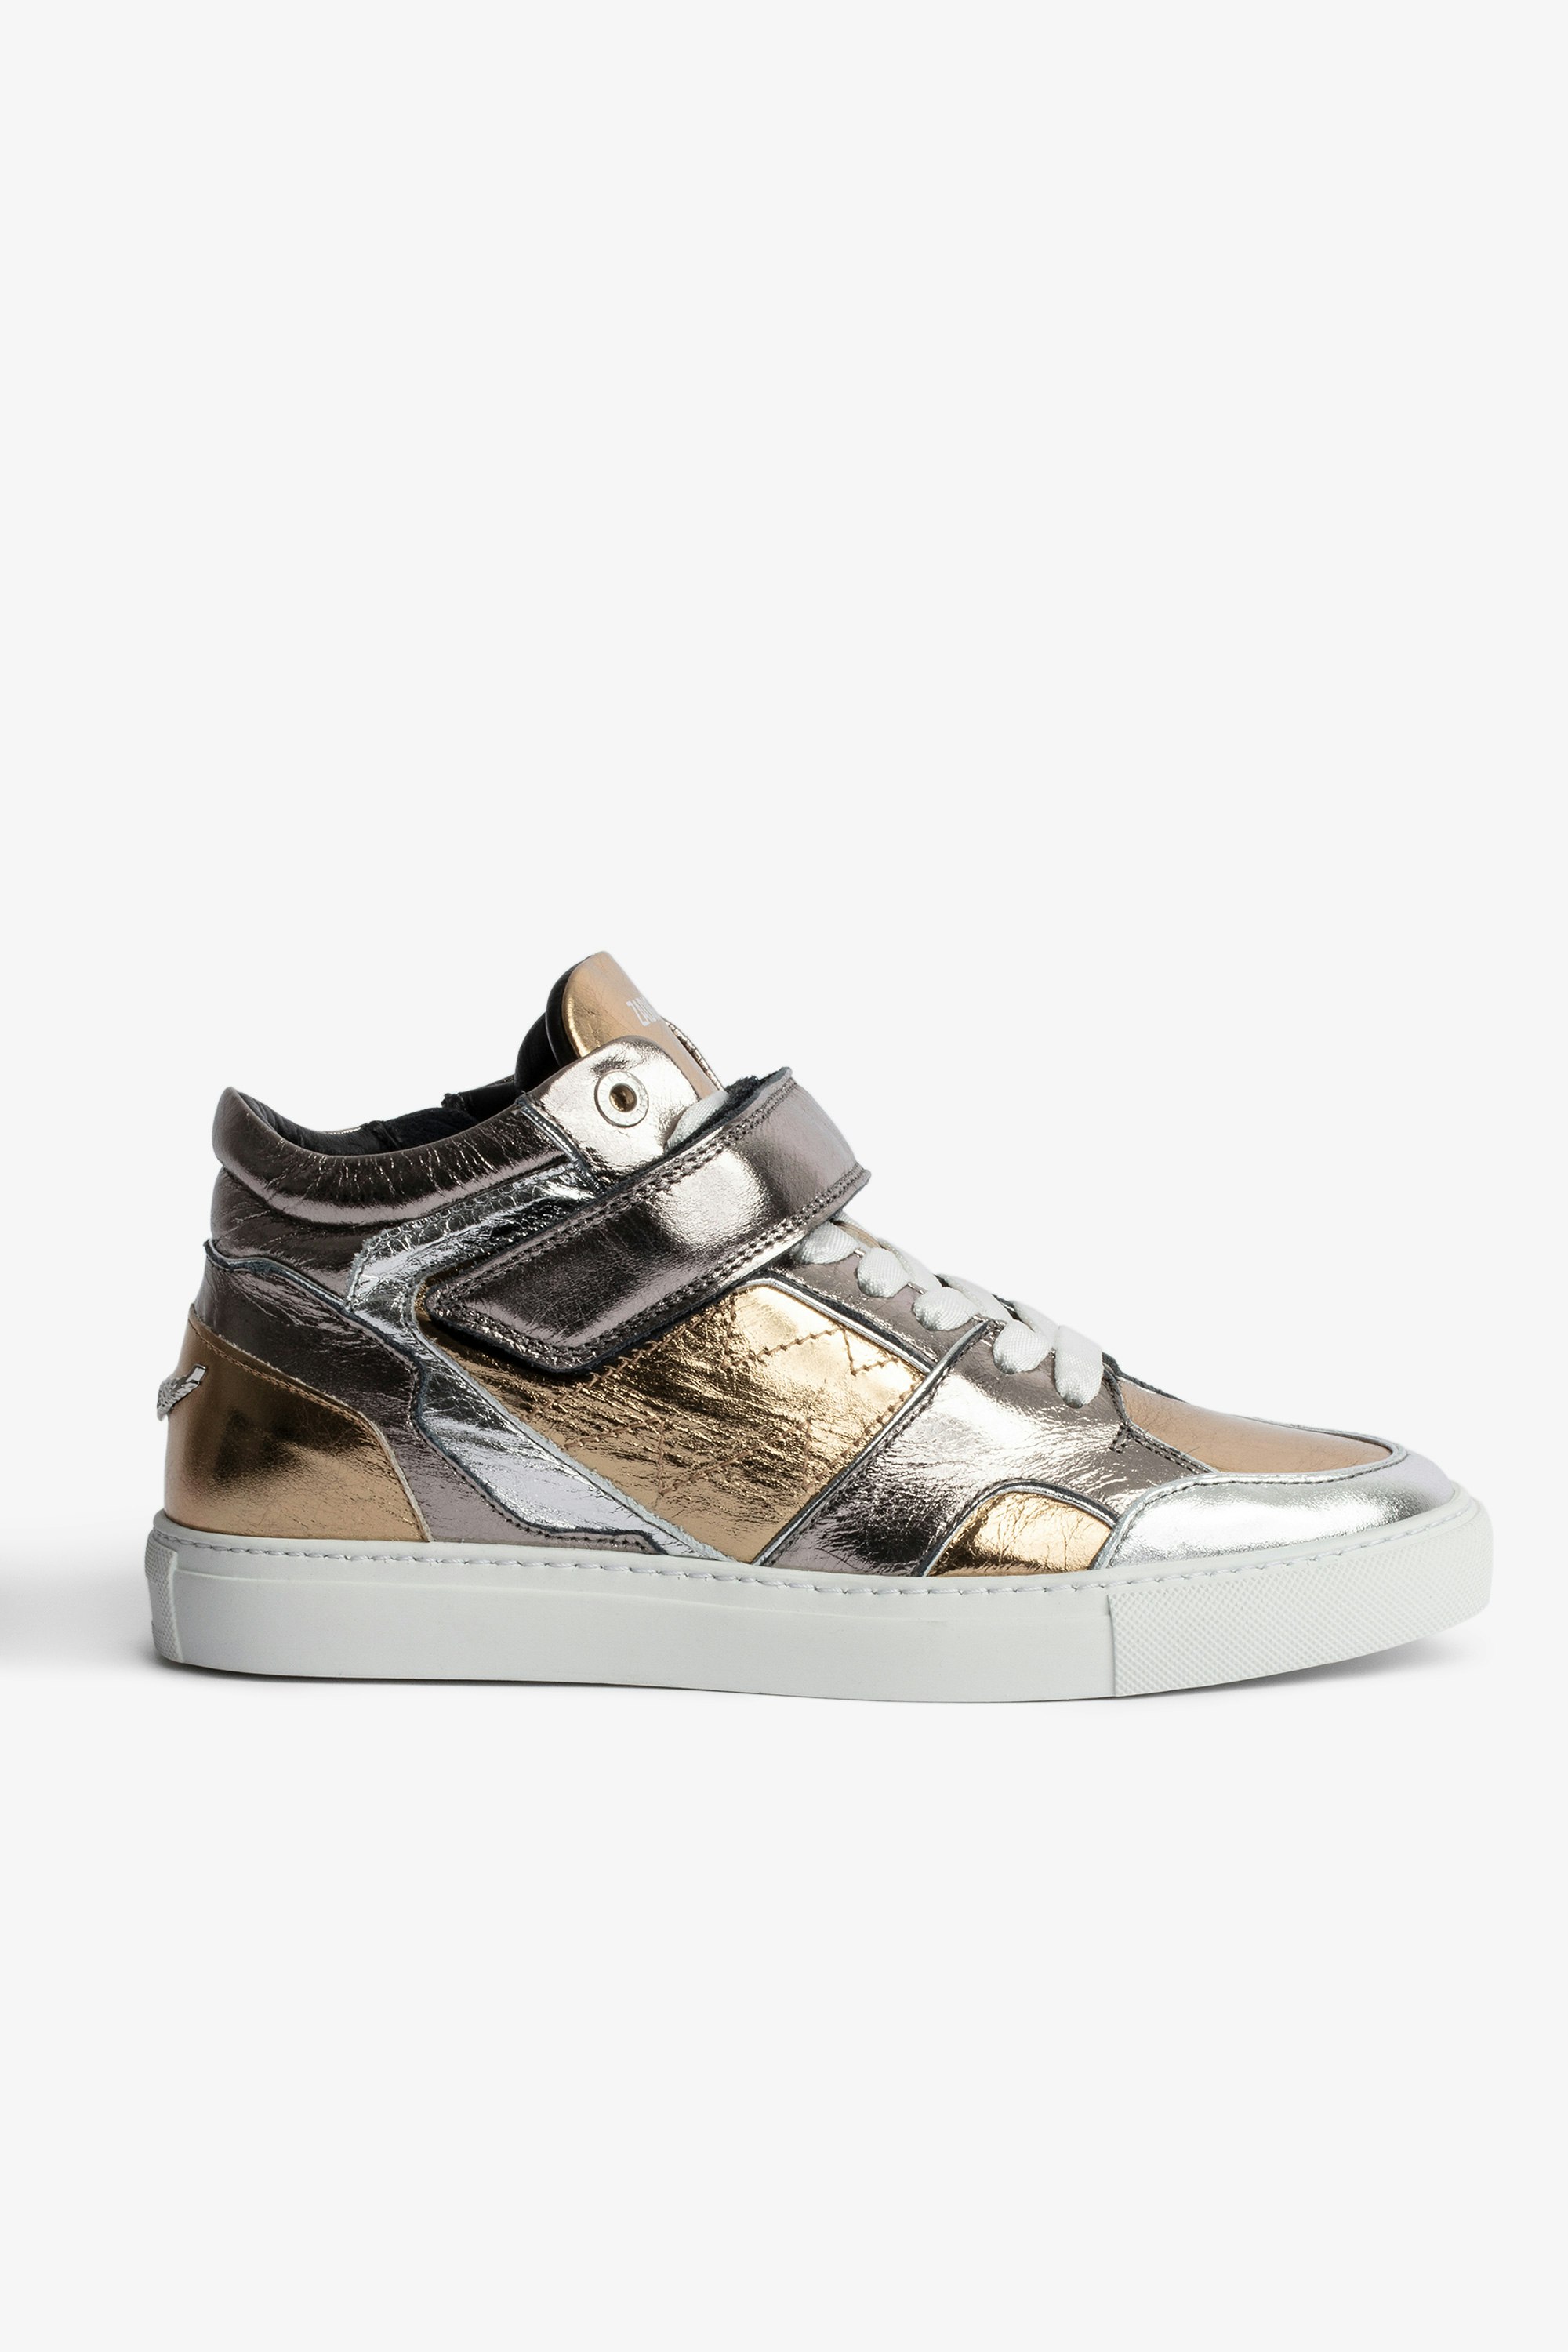 ZV1747 Mid-Top Sneakers Women’s mid-top sneakers in silver and gold metallic leather